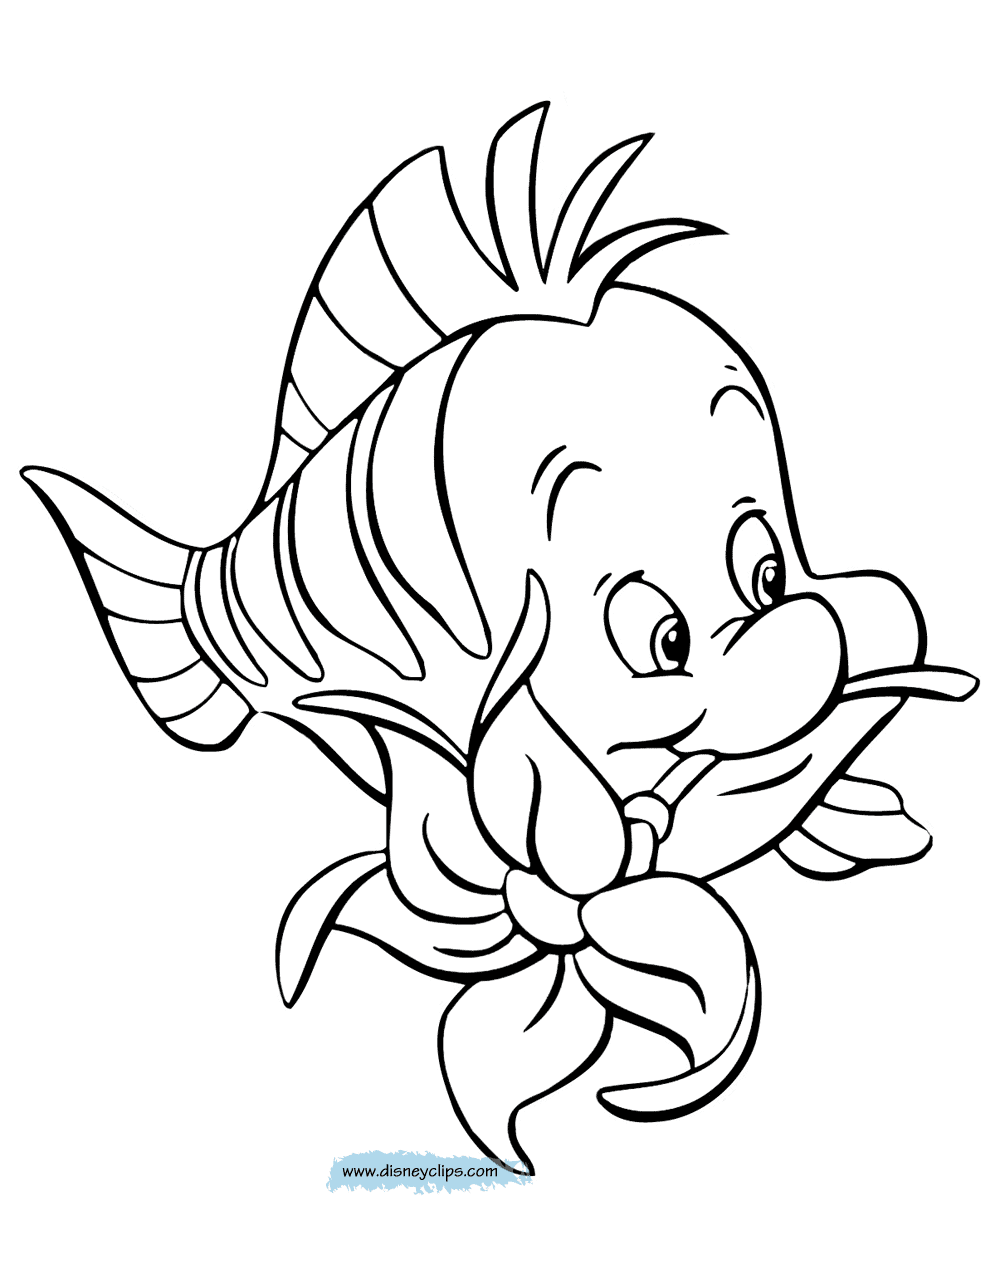 printable little mermaid coloring pages best 15 little mermaid flounder coloring pages free big little coloring mermaid pages printable 